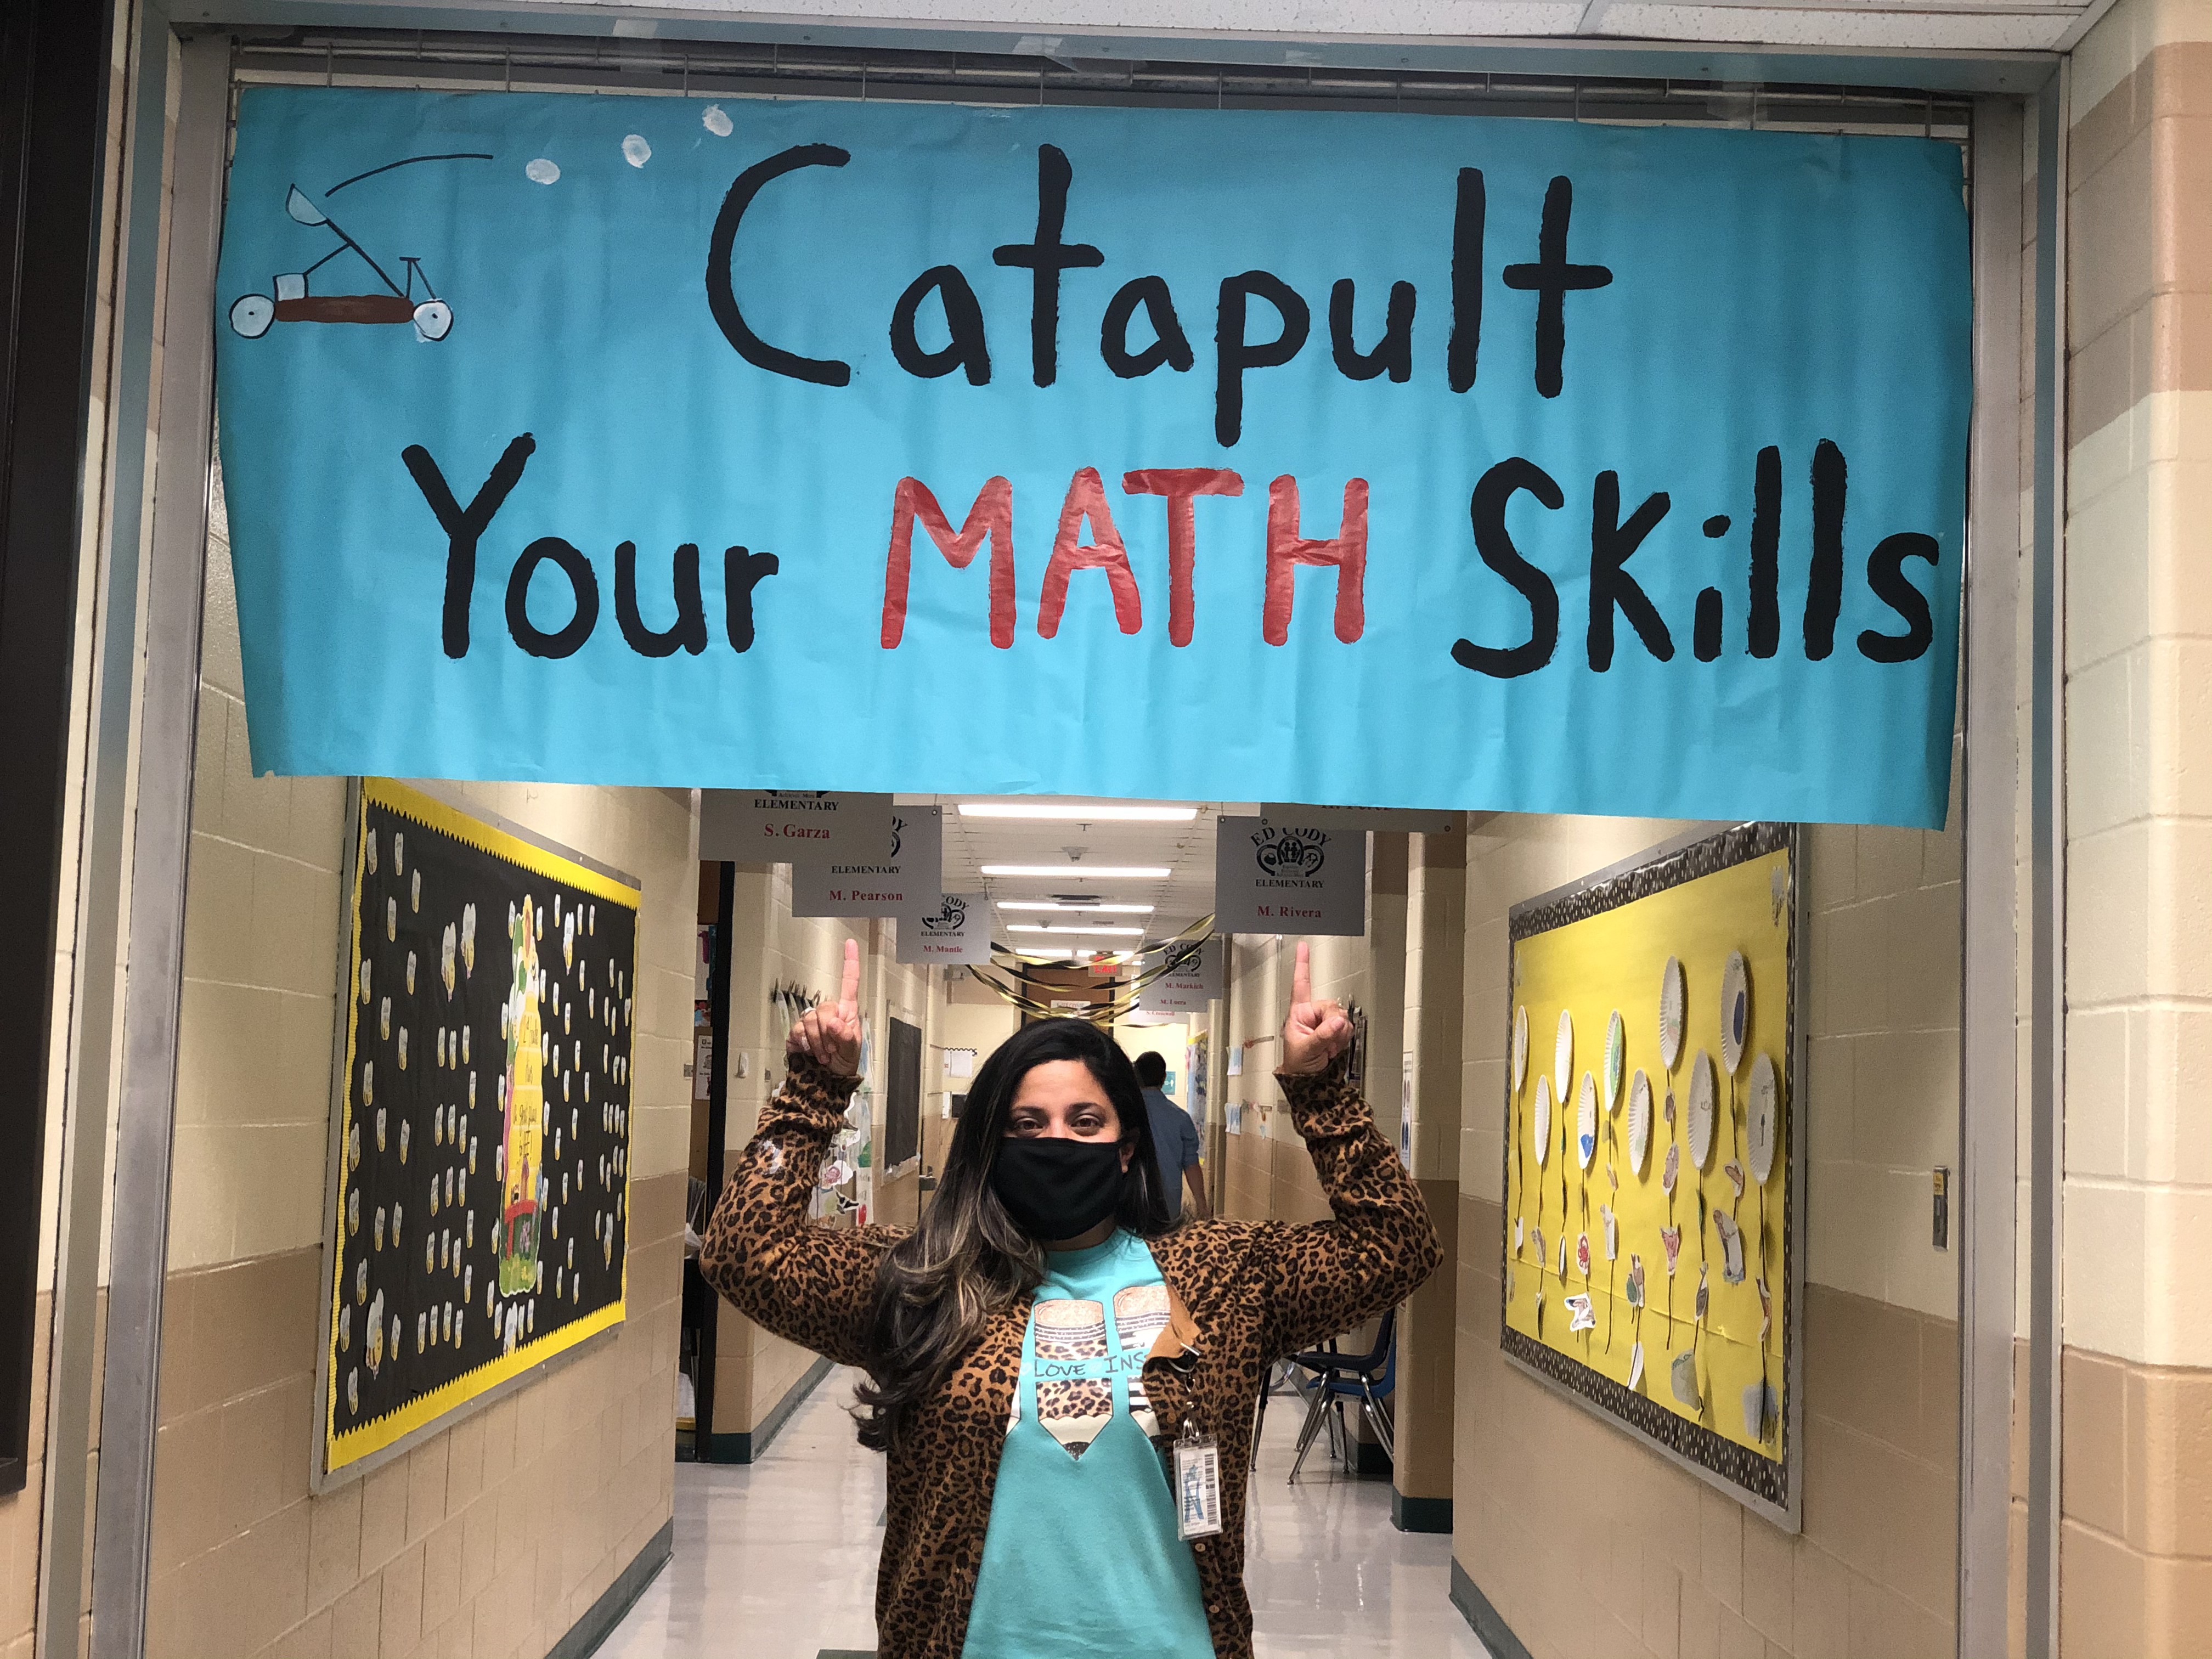 Female teacher pointing up to sign saying Catapult Your Math Skills.